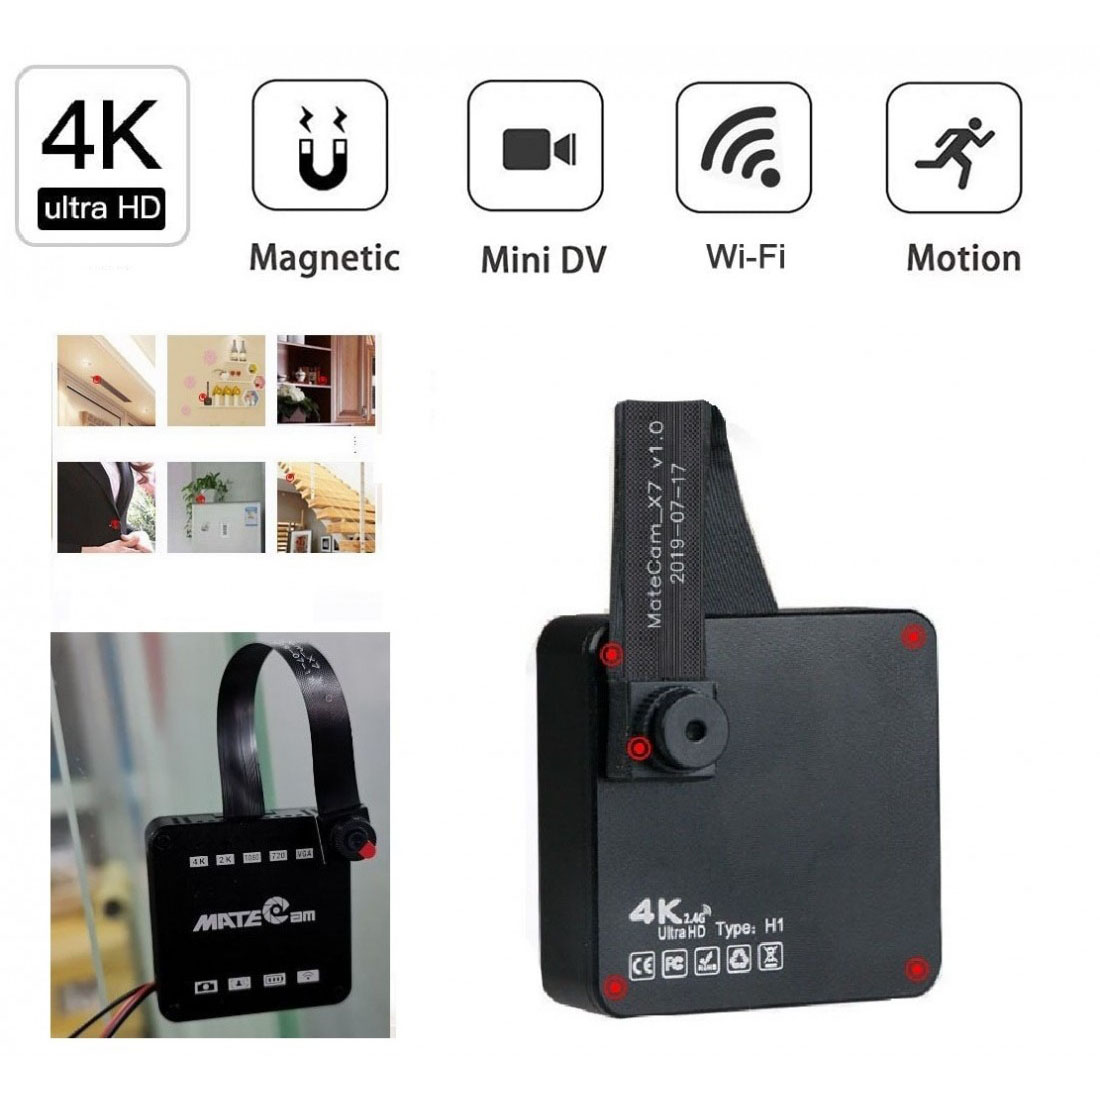 Wholesale Price ChinaHOME SECURITY WITH REMOTE- 4K Unltra HD Spy Camera Wireless Hidden Camera with Magnet, Mini Portable Home Security Battery Powered Covert Nanny Cam, Small Video Recorder /Motion Activated – MATECAM